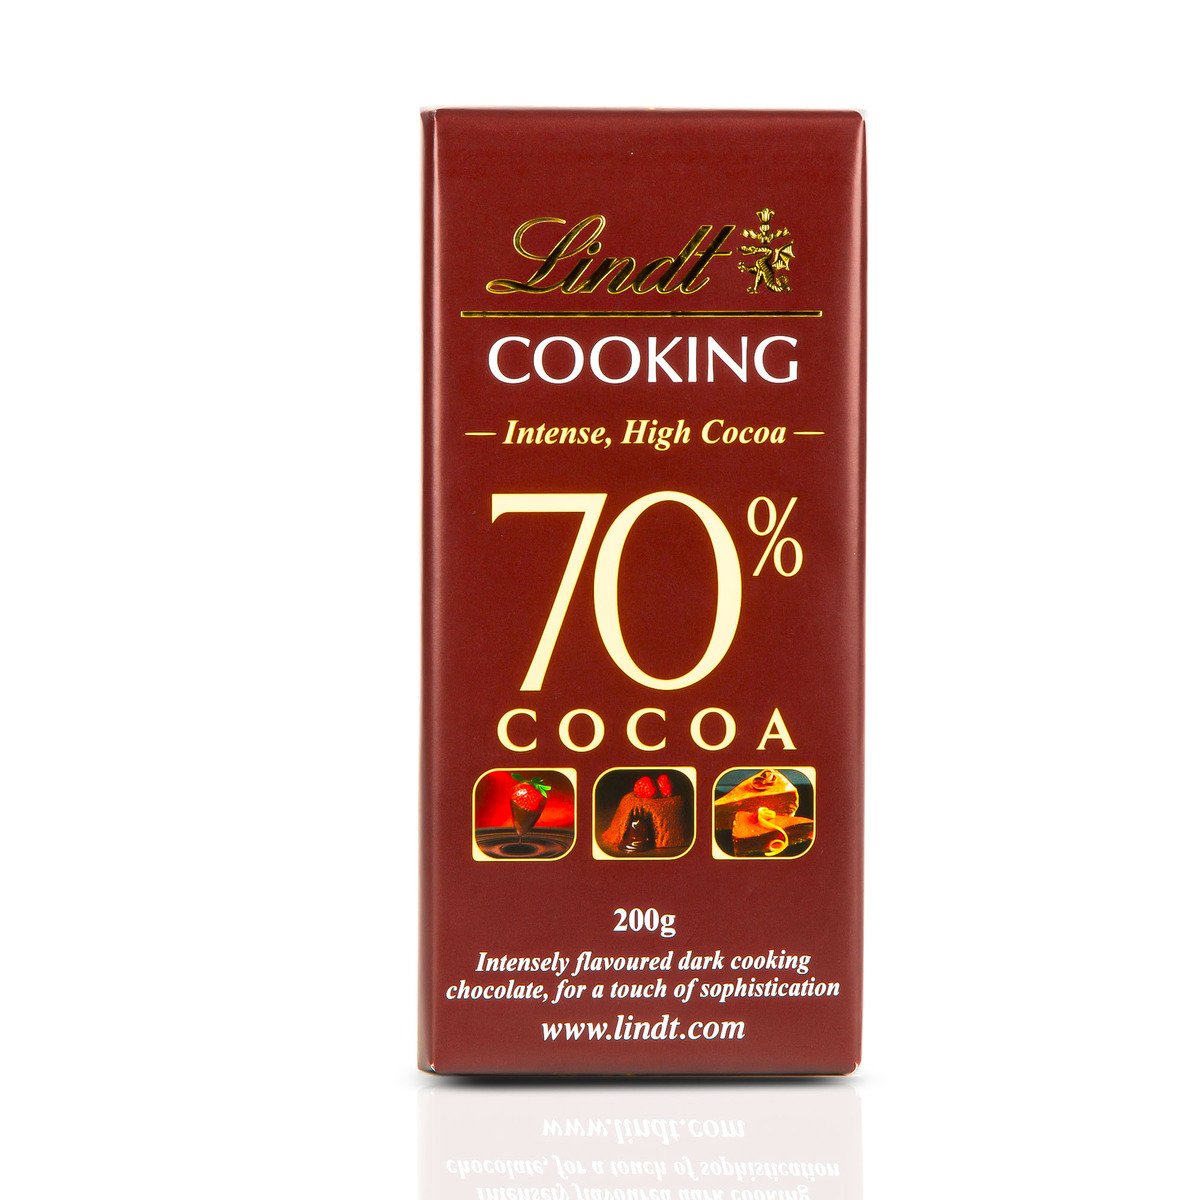 Buy Lindt Cooking 70% Cocoa Intense 200 g Online at Best Price | Covrd Choco.Bars&Tab | Lulu Kuwait in Kuwait